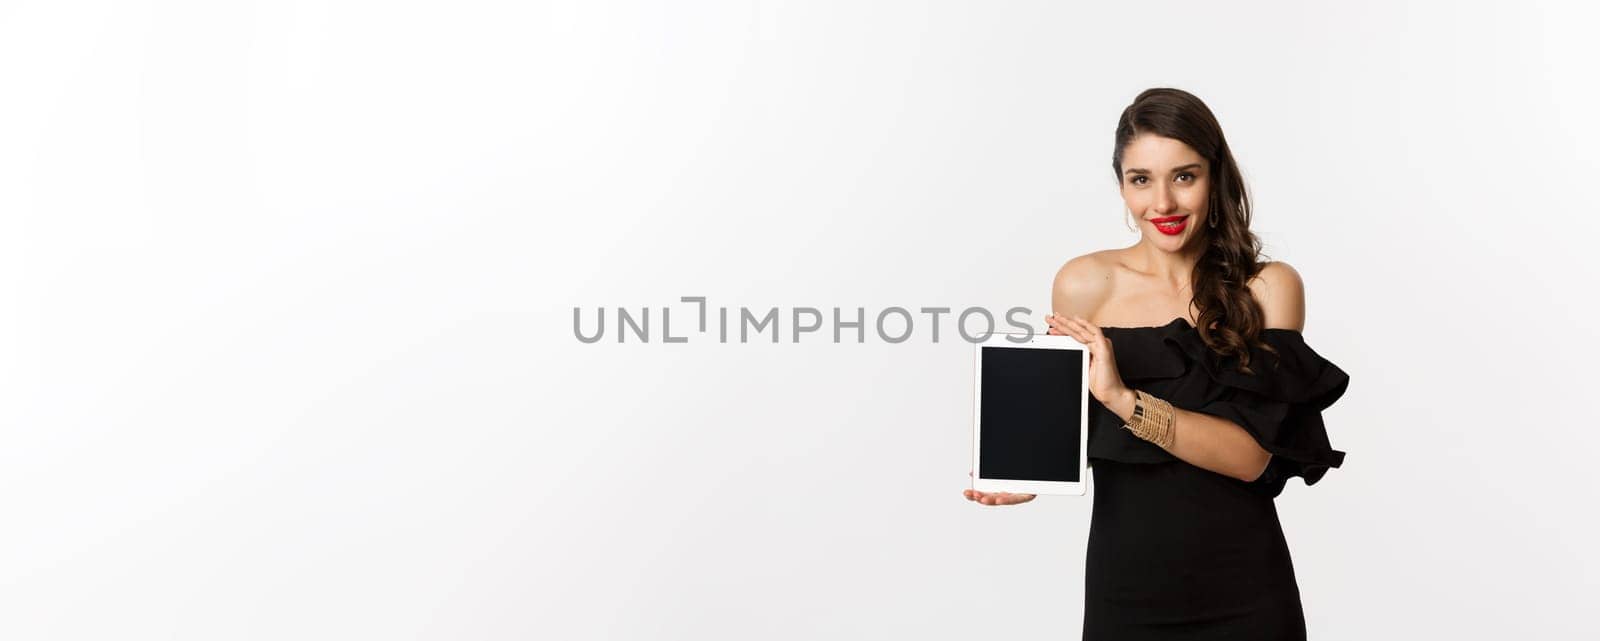 Online shopping concept. Tempted pretty woman in black dress showing digital tablet screen, standing over white background. Copy space